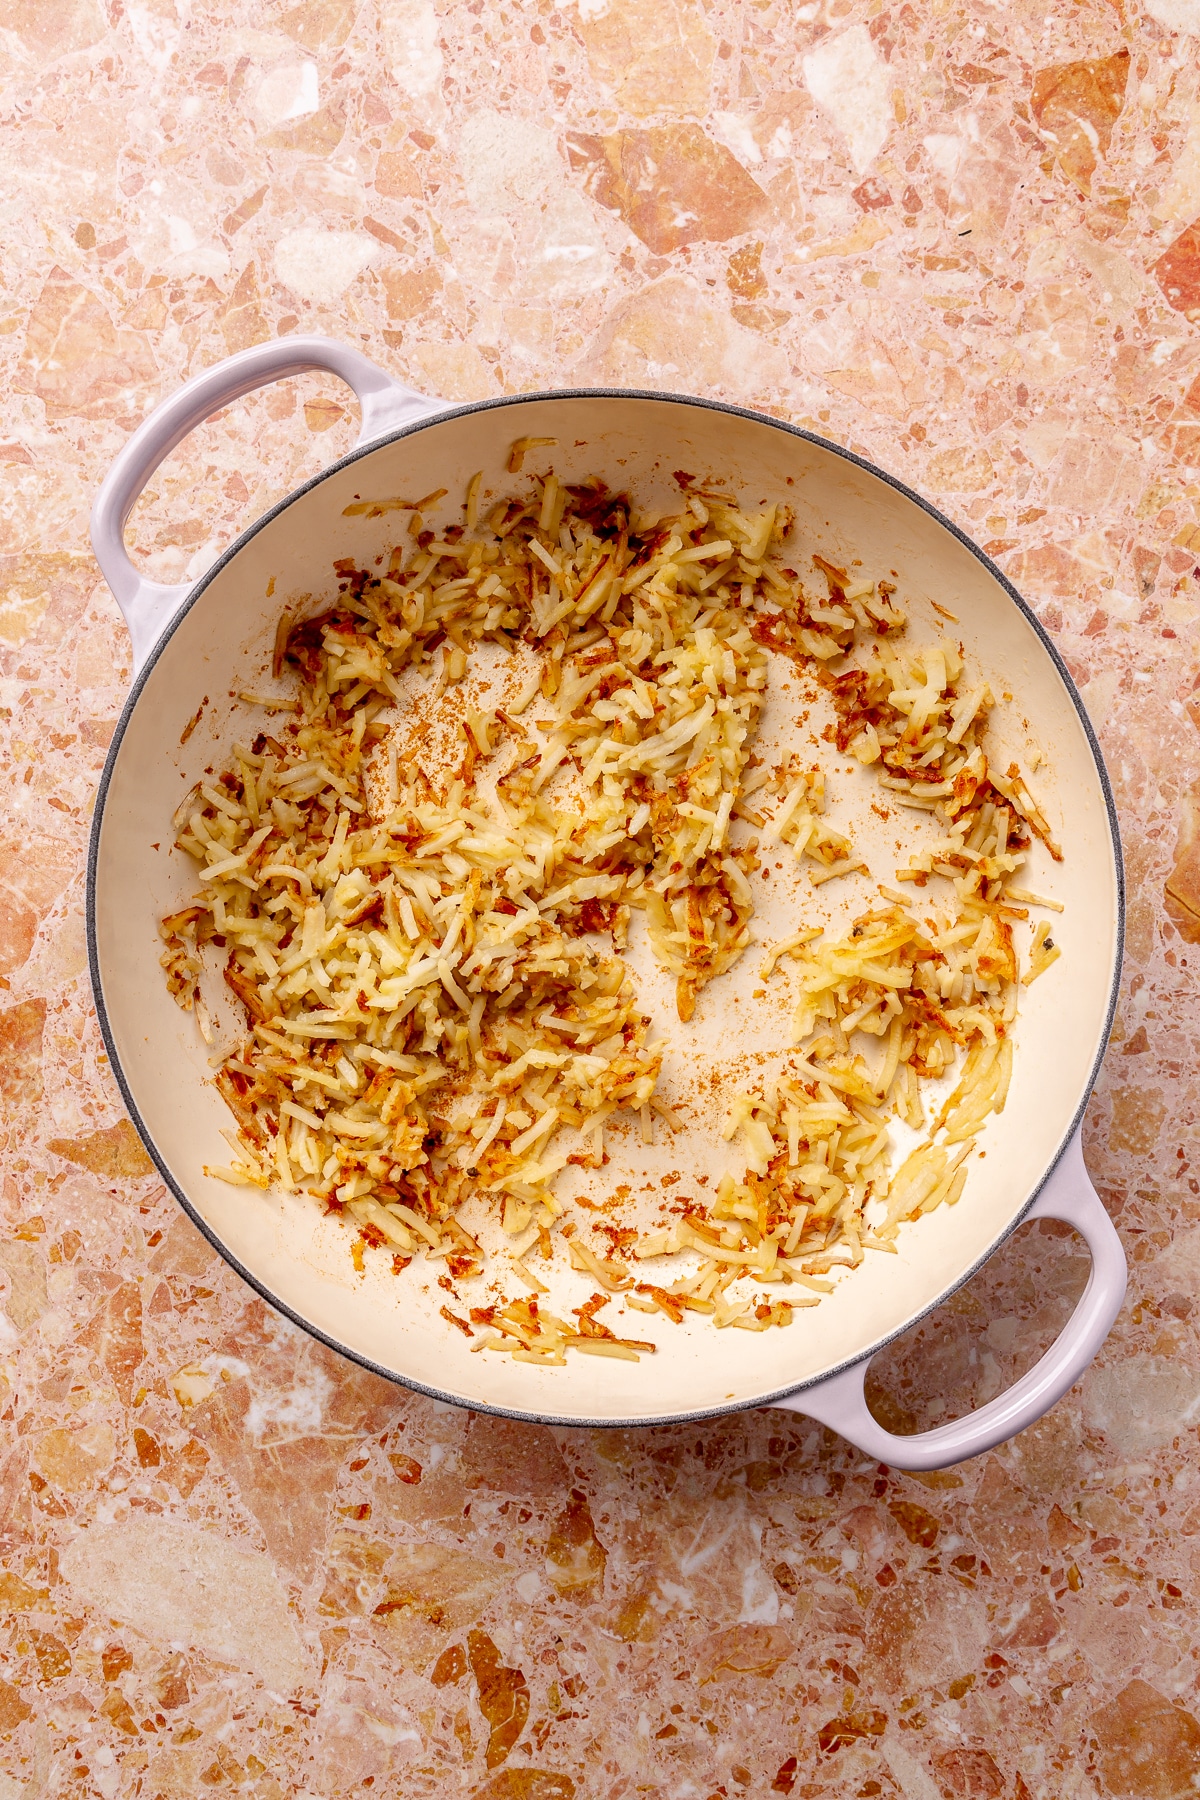 Lightly browned hash browns sit in a white enameled pot which sits on a pink countertop.